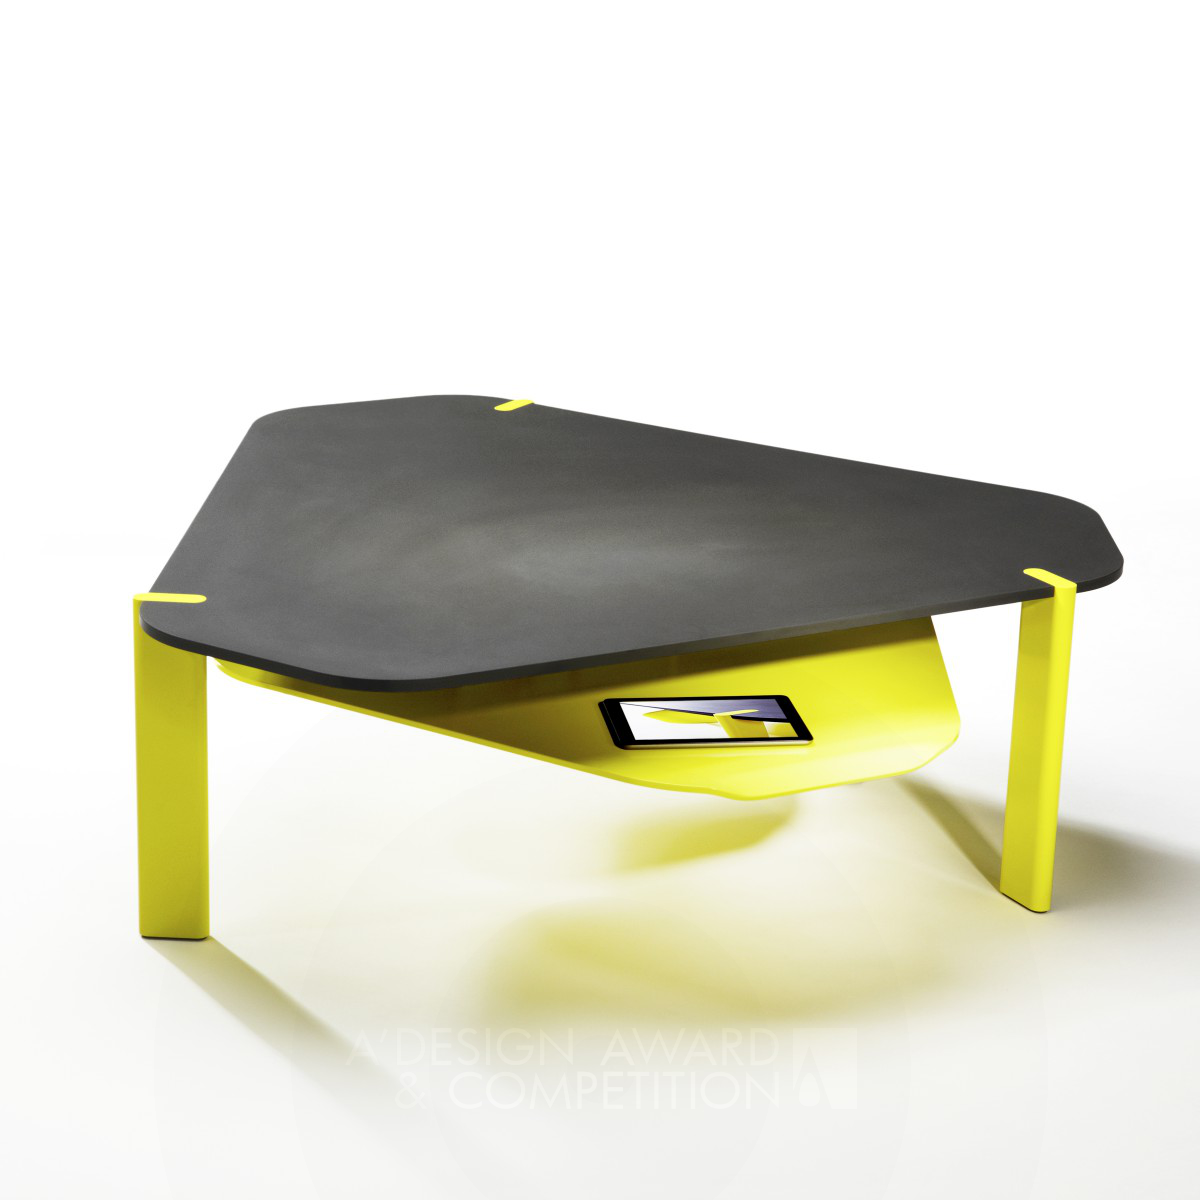 Transition Modular Table System by Marc Scimé